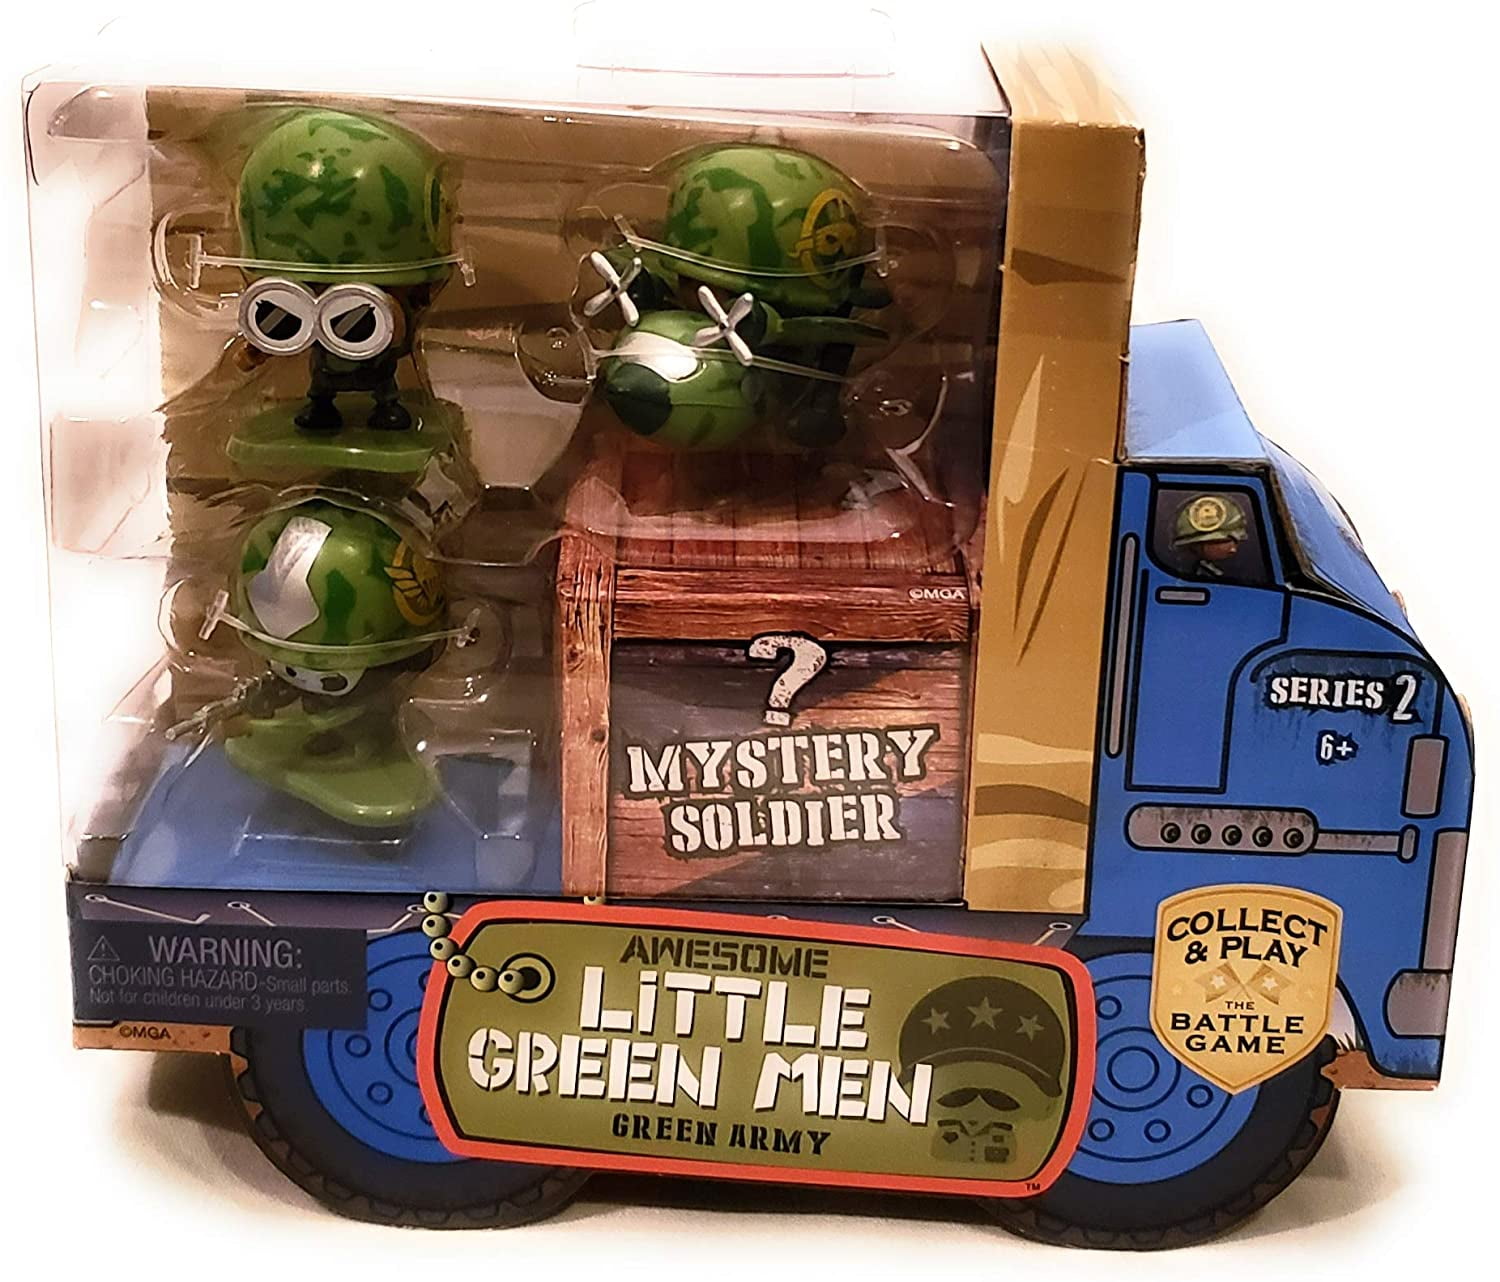 Awesome Little Green Men 4 Pack Series 2 Green Army Collect Play The Battle Game 